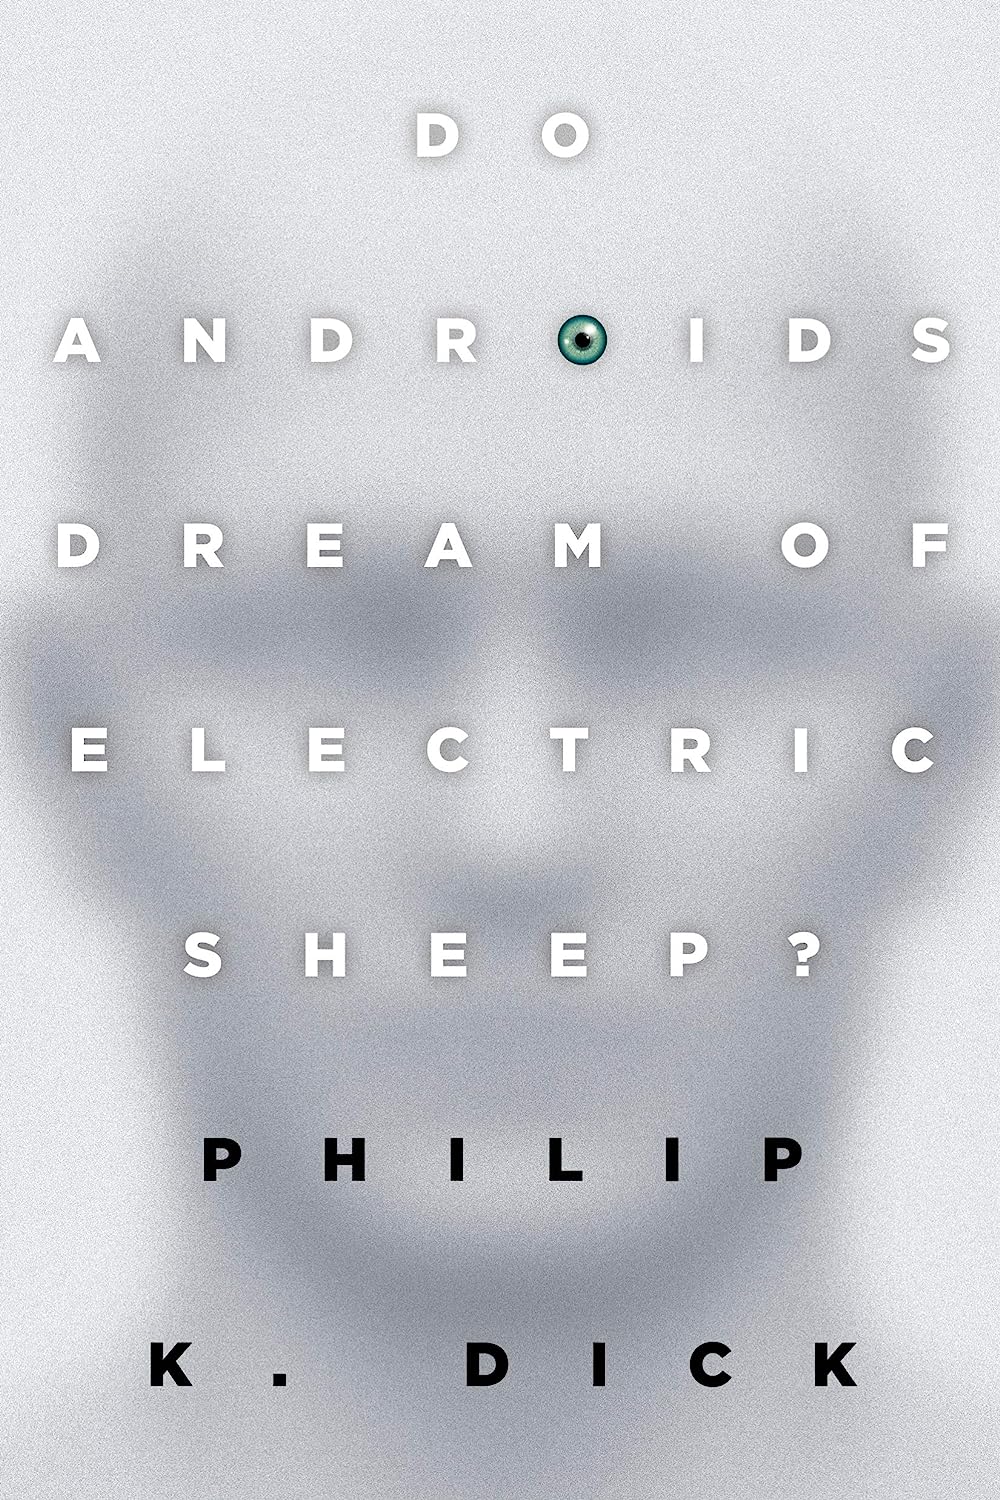 Do Androids Dream of Electric Sheep? by Philip K. Dick (1968)